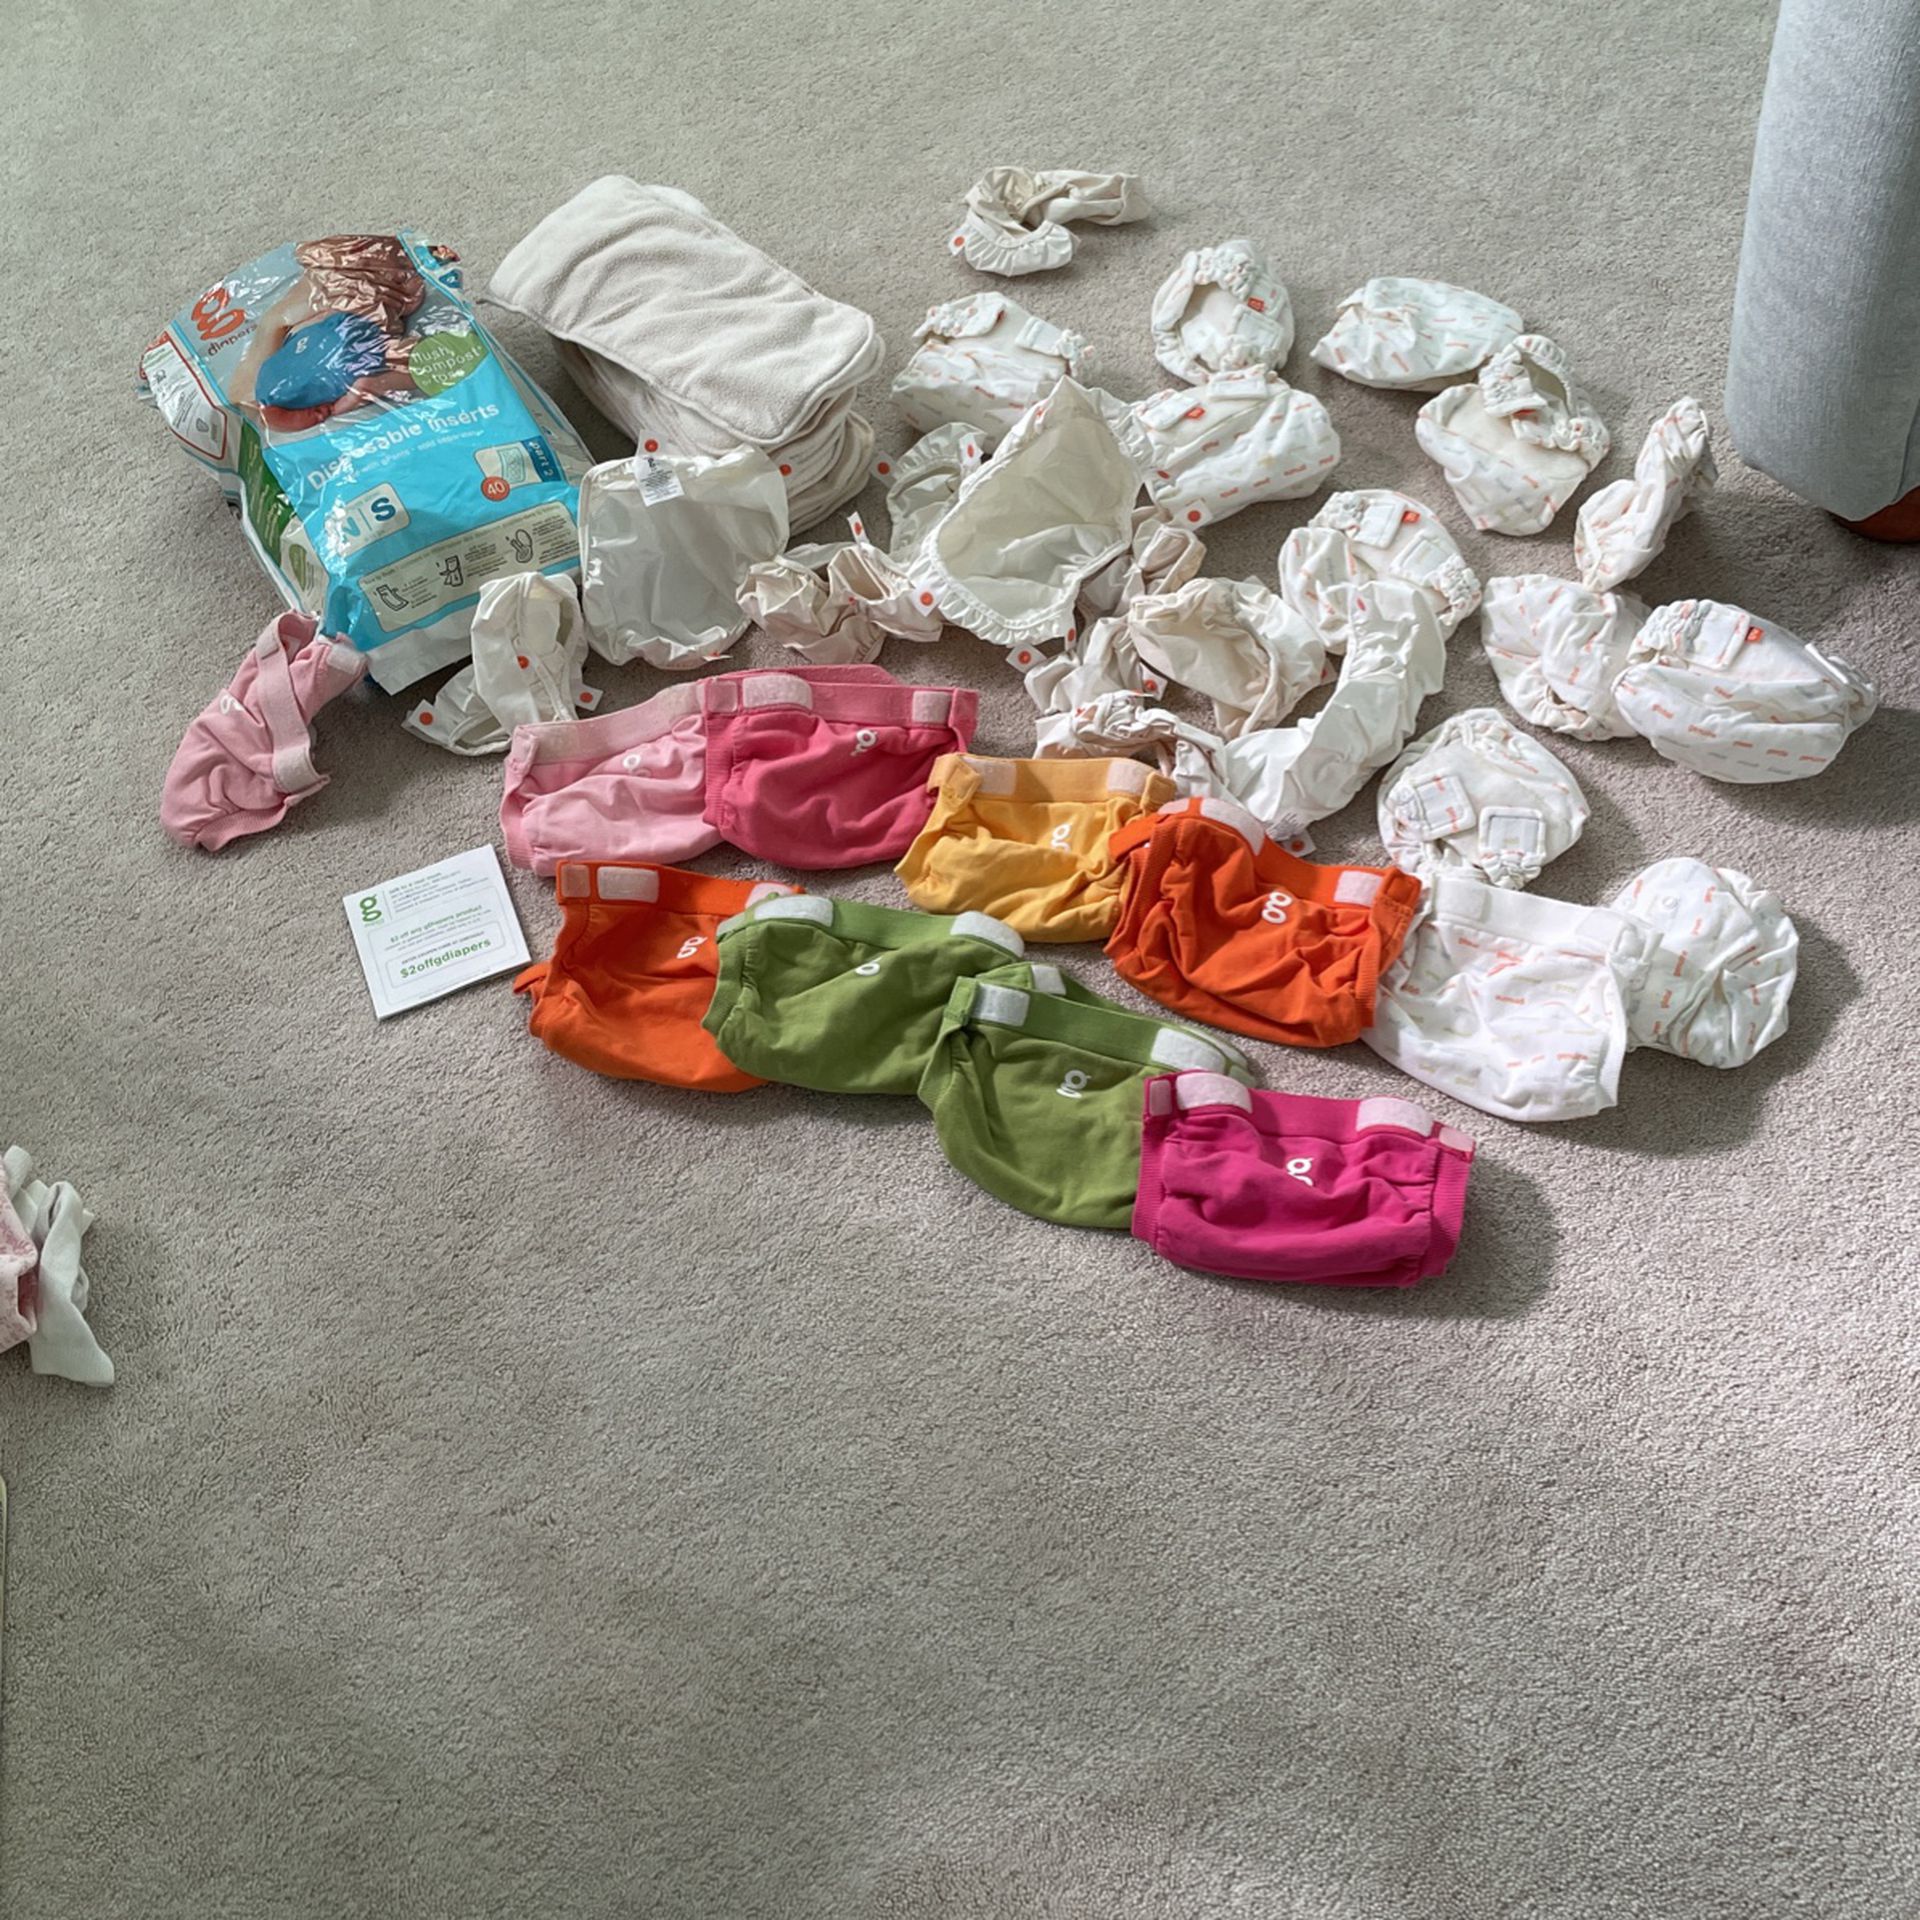 Newborn diapers by G